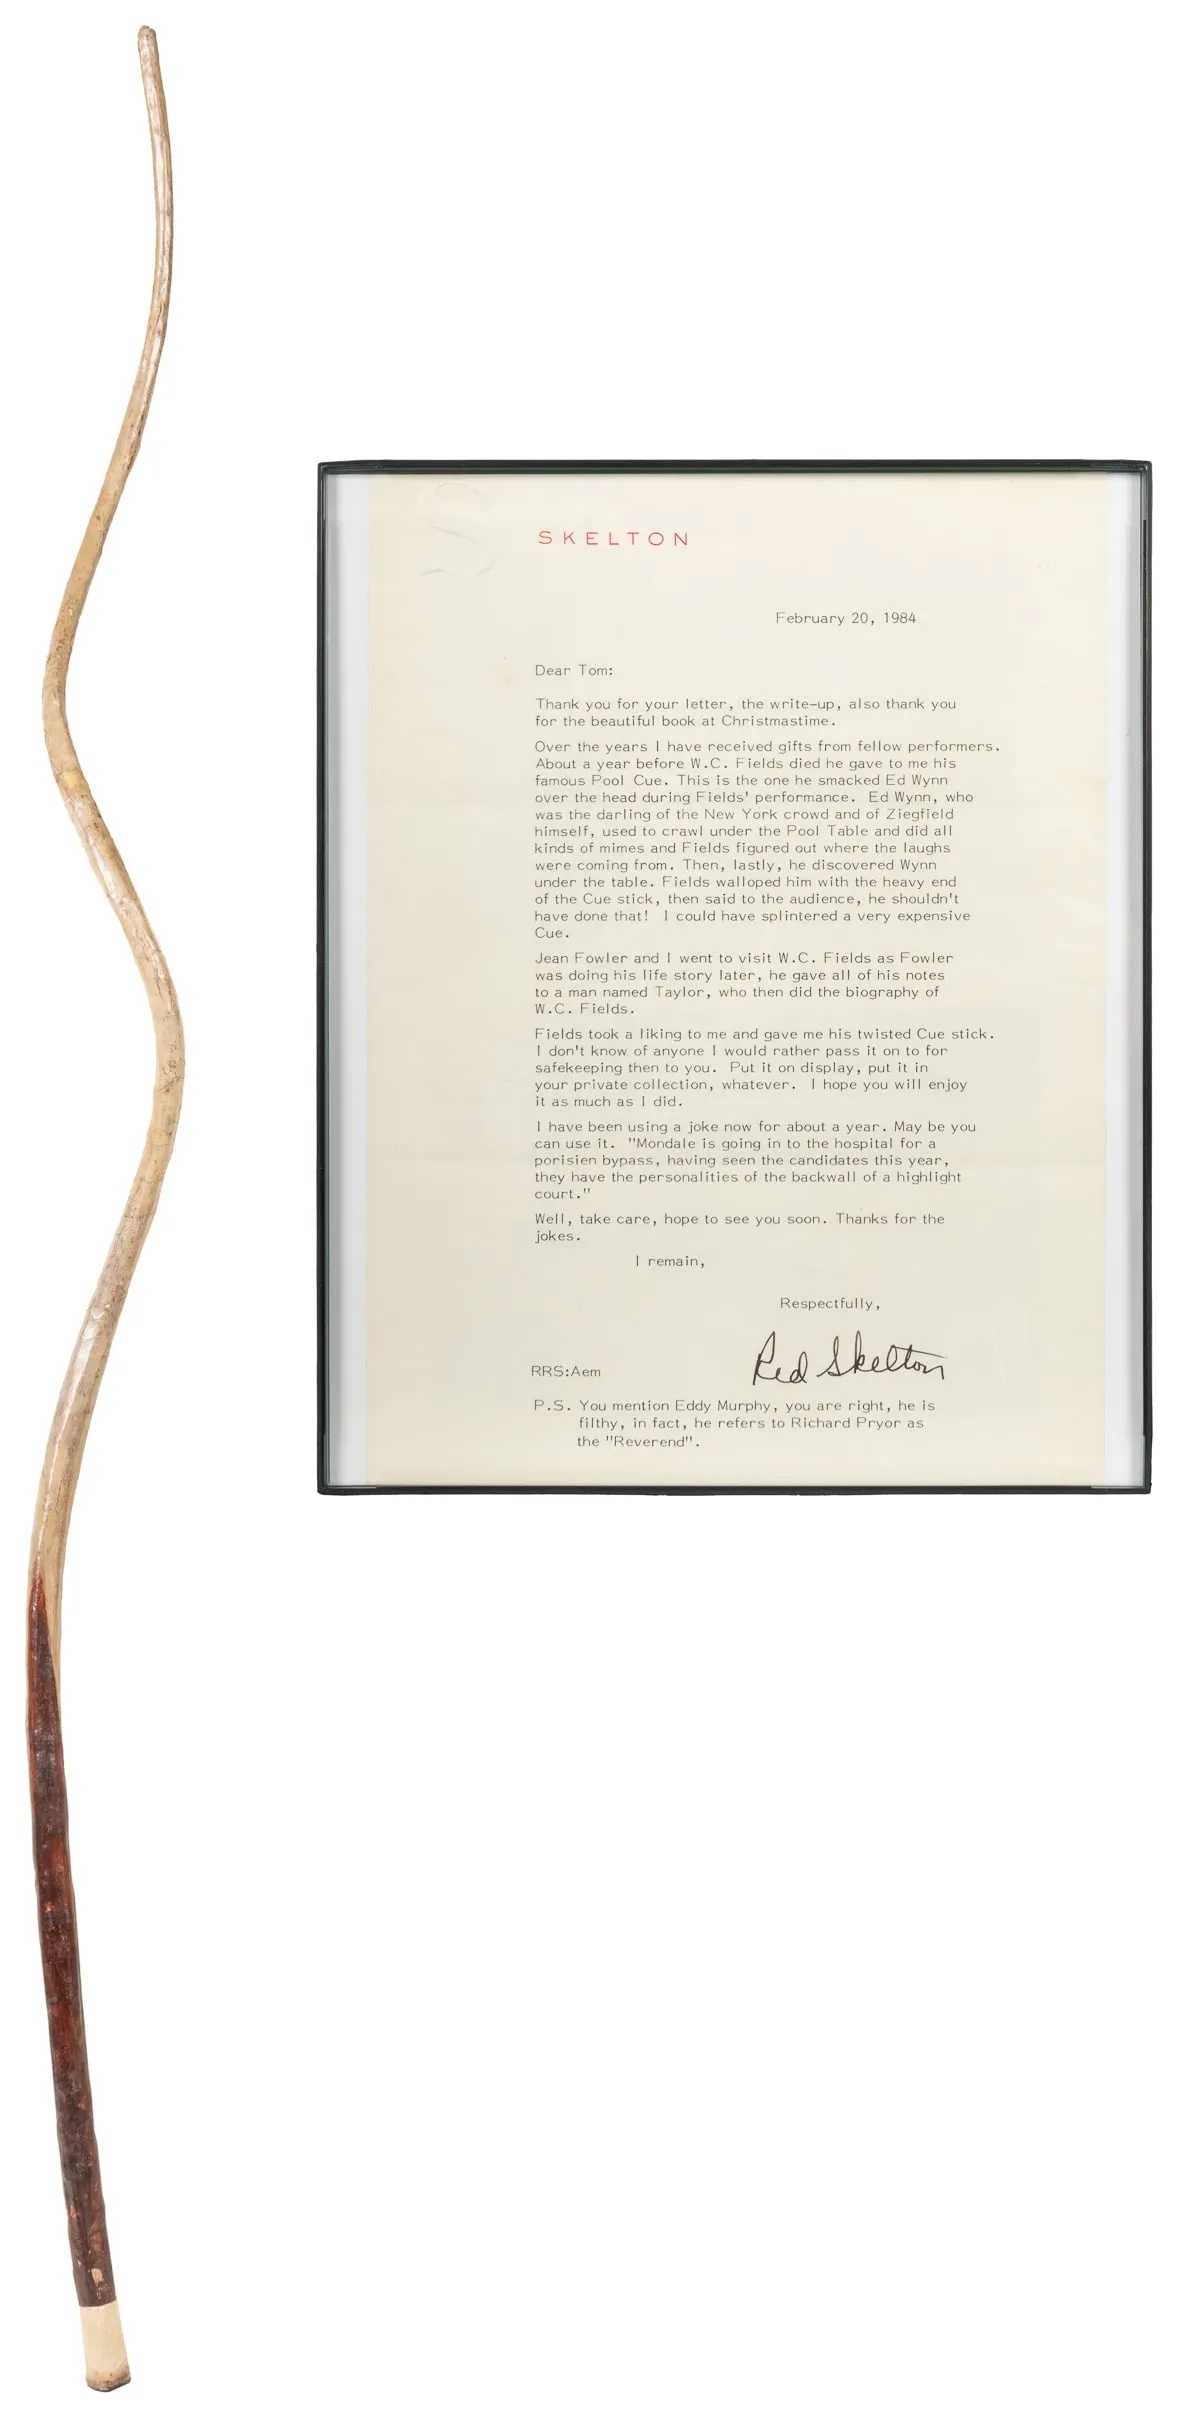 W. C. Fields’ Ziegfeld Follies-used crooked pool cue prop, shown with a provenance letter from Red Skelton, which sold for $7,500 ($9,375 with buyer’s premium) at Potter & Potter March 28.